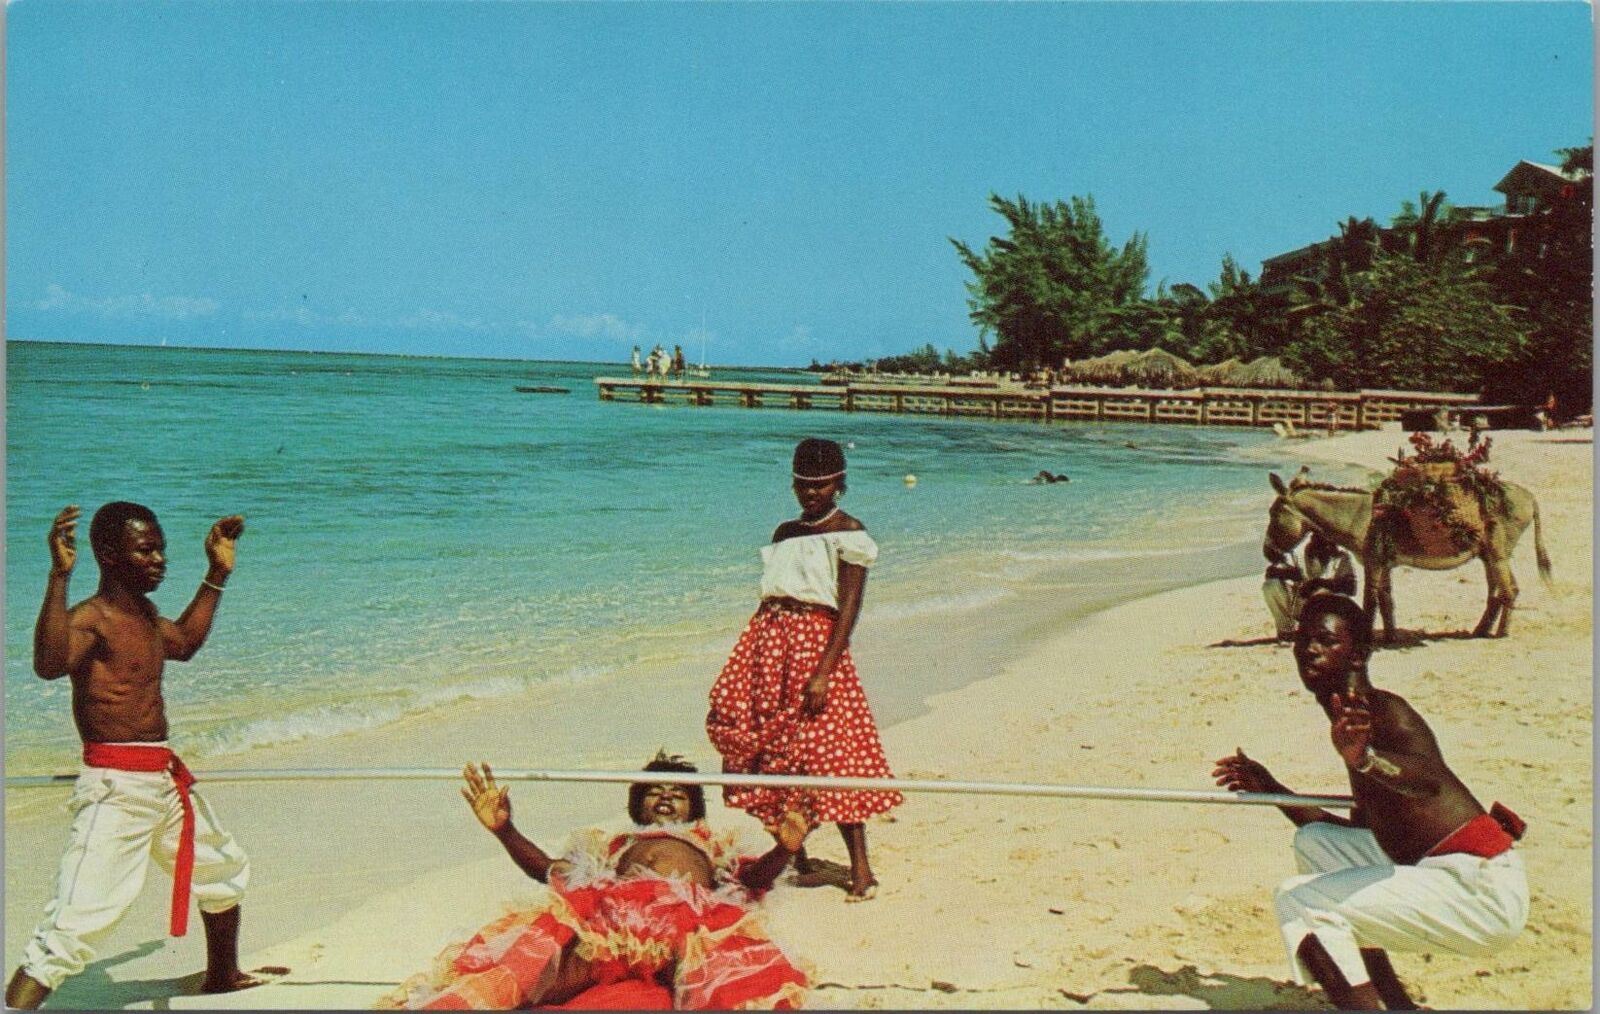 Postcard Doing The Limbo on the Beach in Jamaica WI 